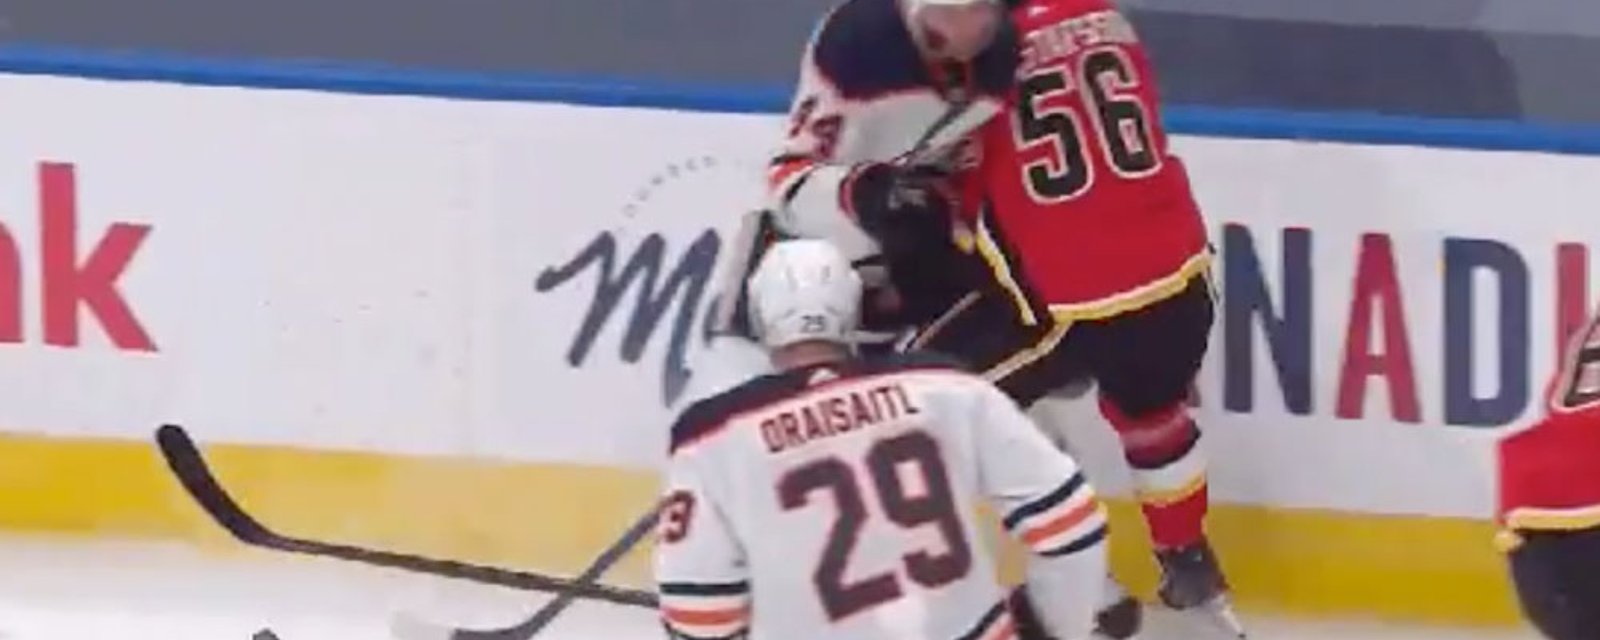 Intense chirping overheard between the benches during Oilers-Flames game 